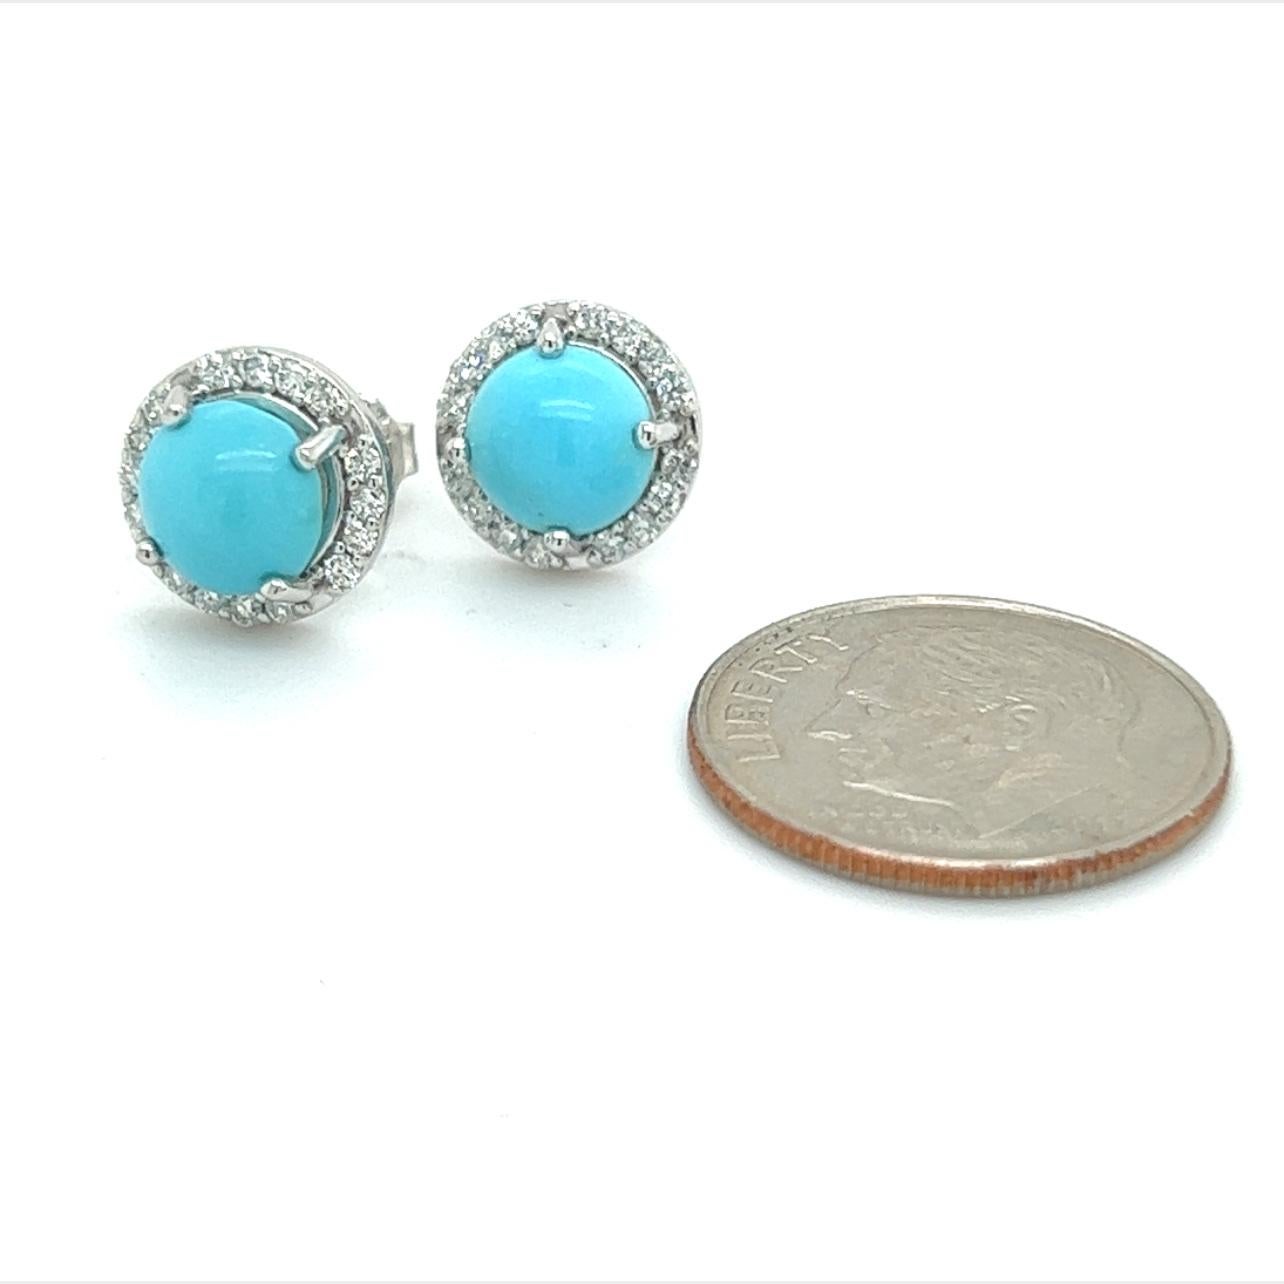 Round Cut Natural Turquoise Diamond Stud Earrings 14k White Gold 2.95 TCW Certified For Sale